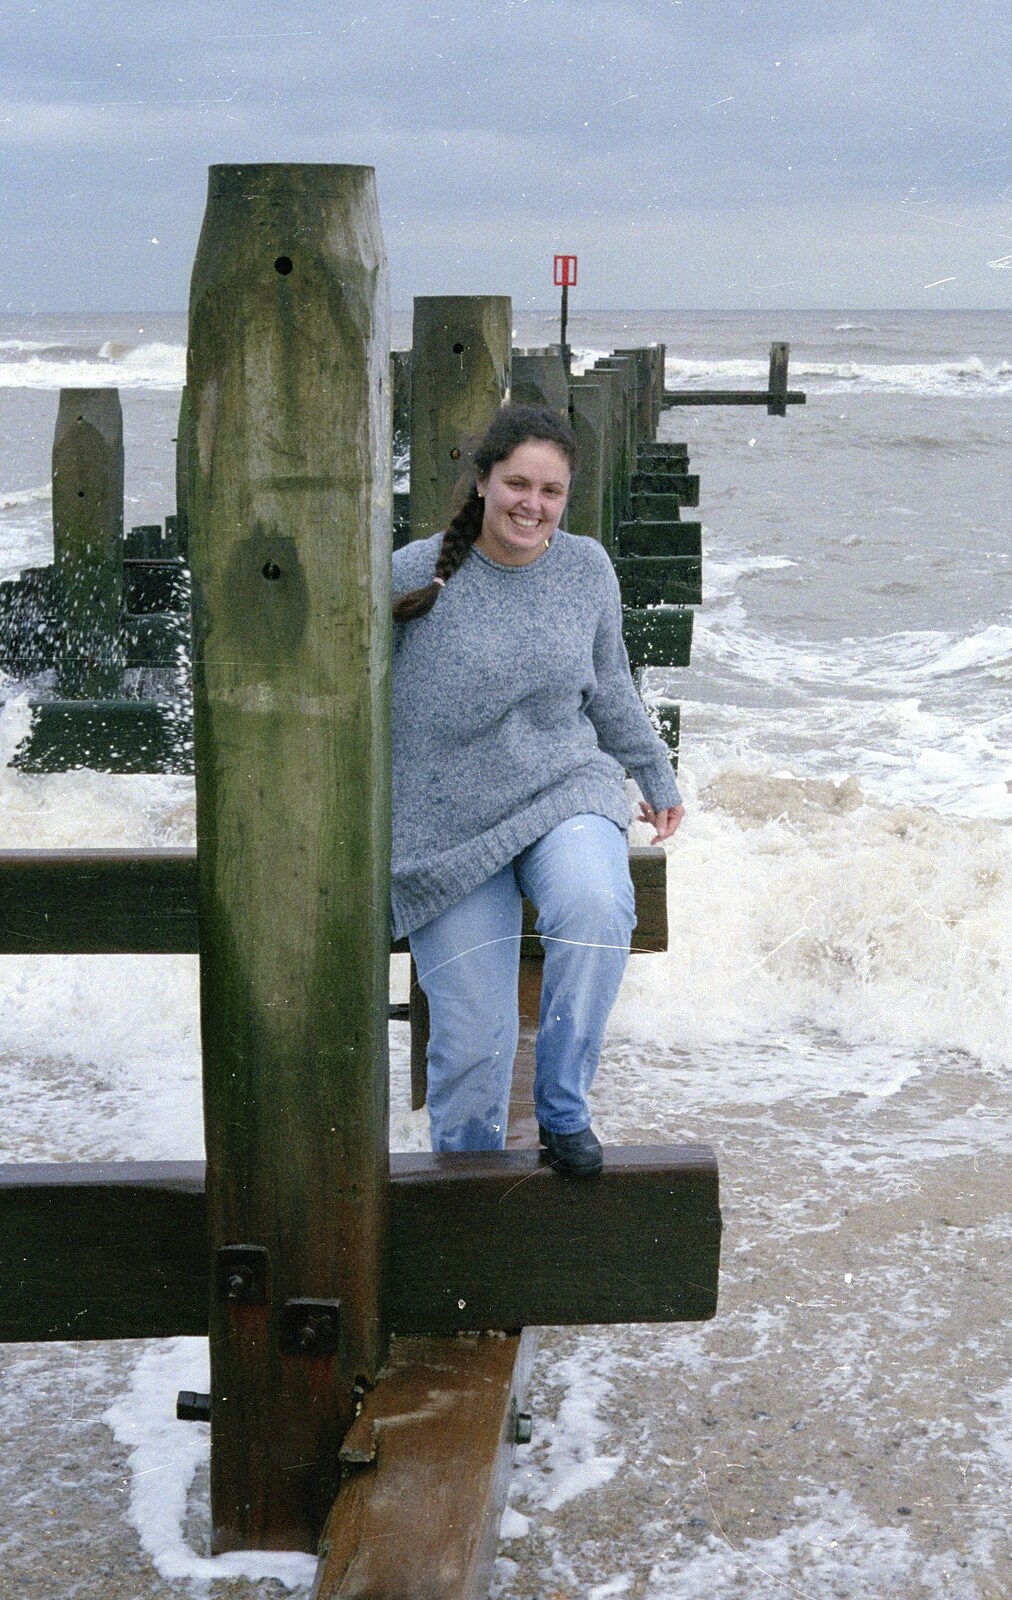 Samantha on a groyne from The BSCC Does Le Shuttle, and a CISU Party at Andrew's, Saint-Omer and Ipswich - 3rd August 1996